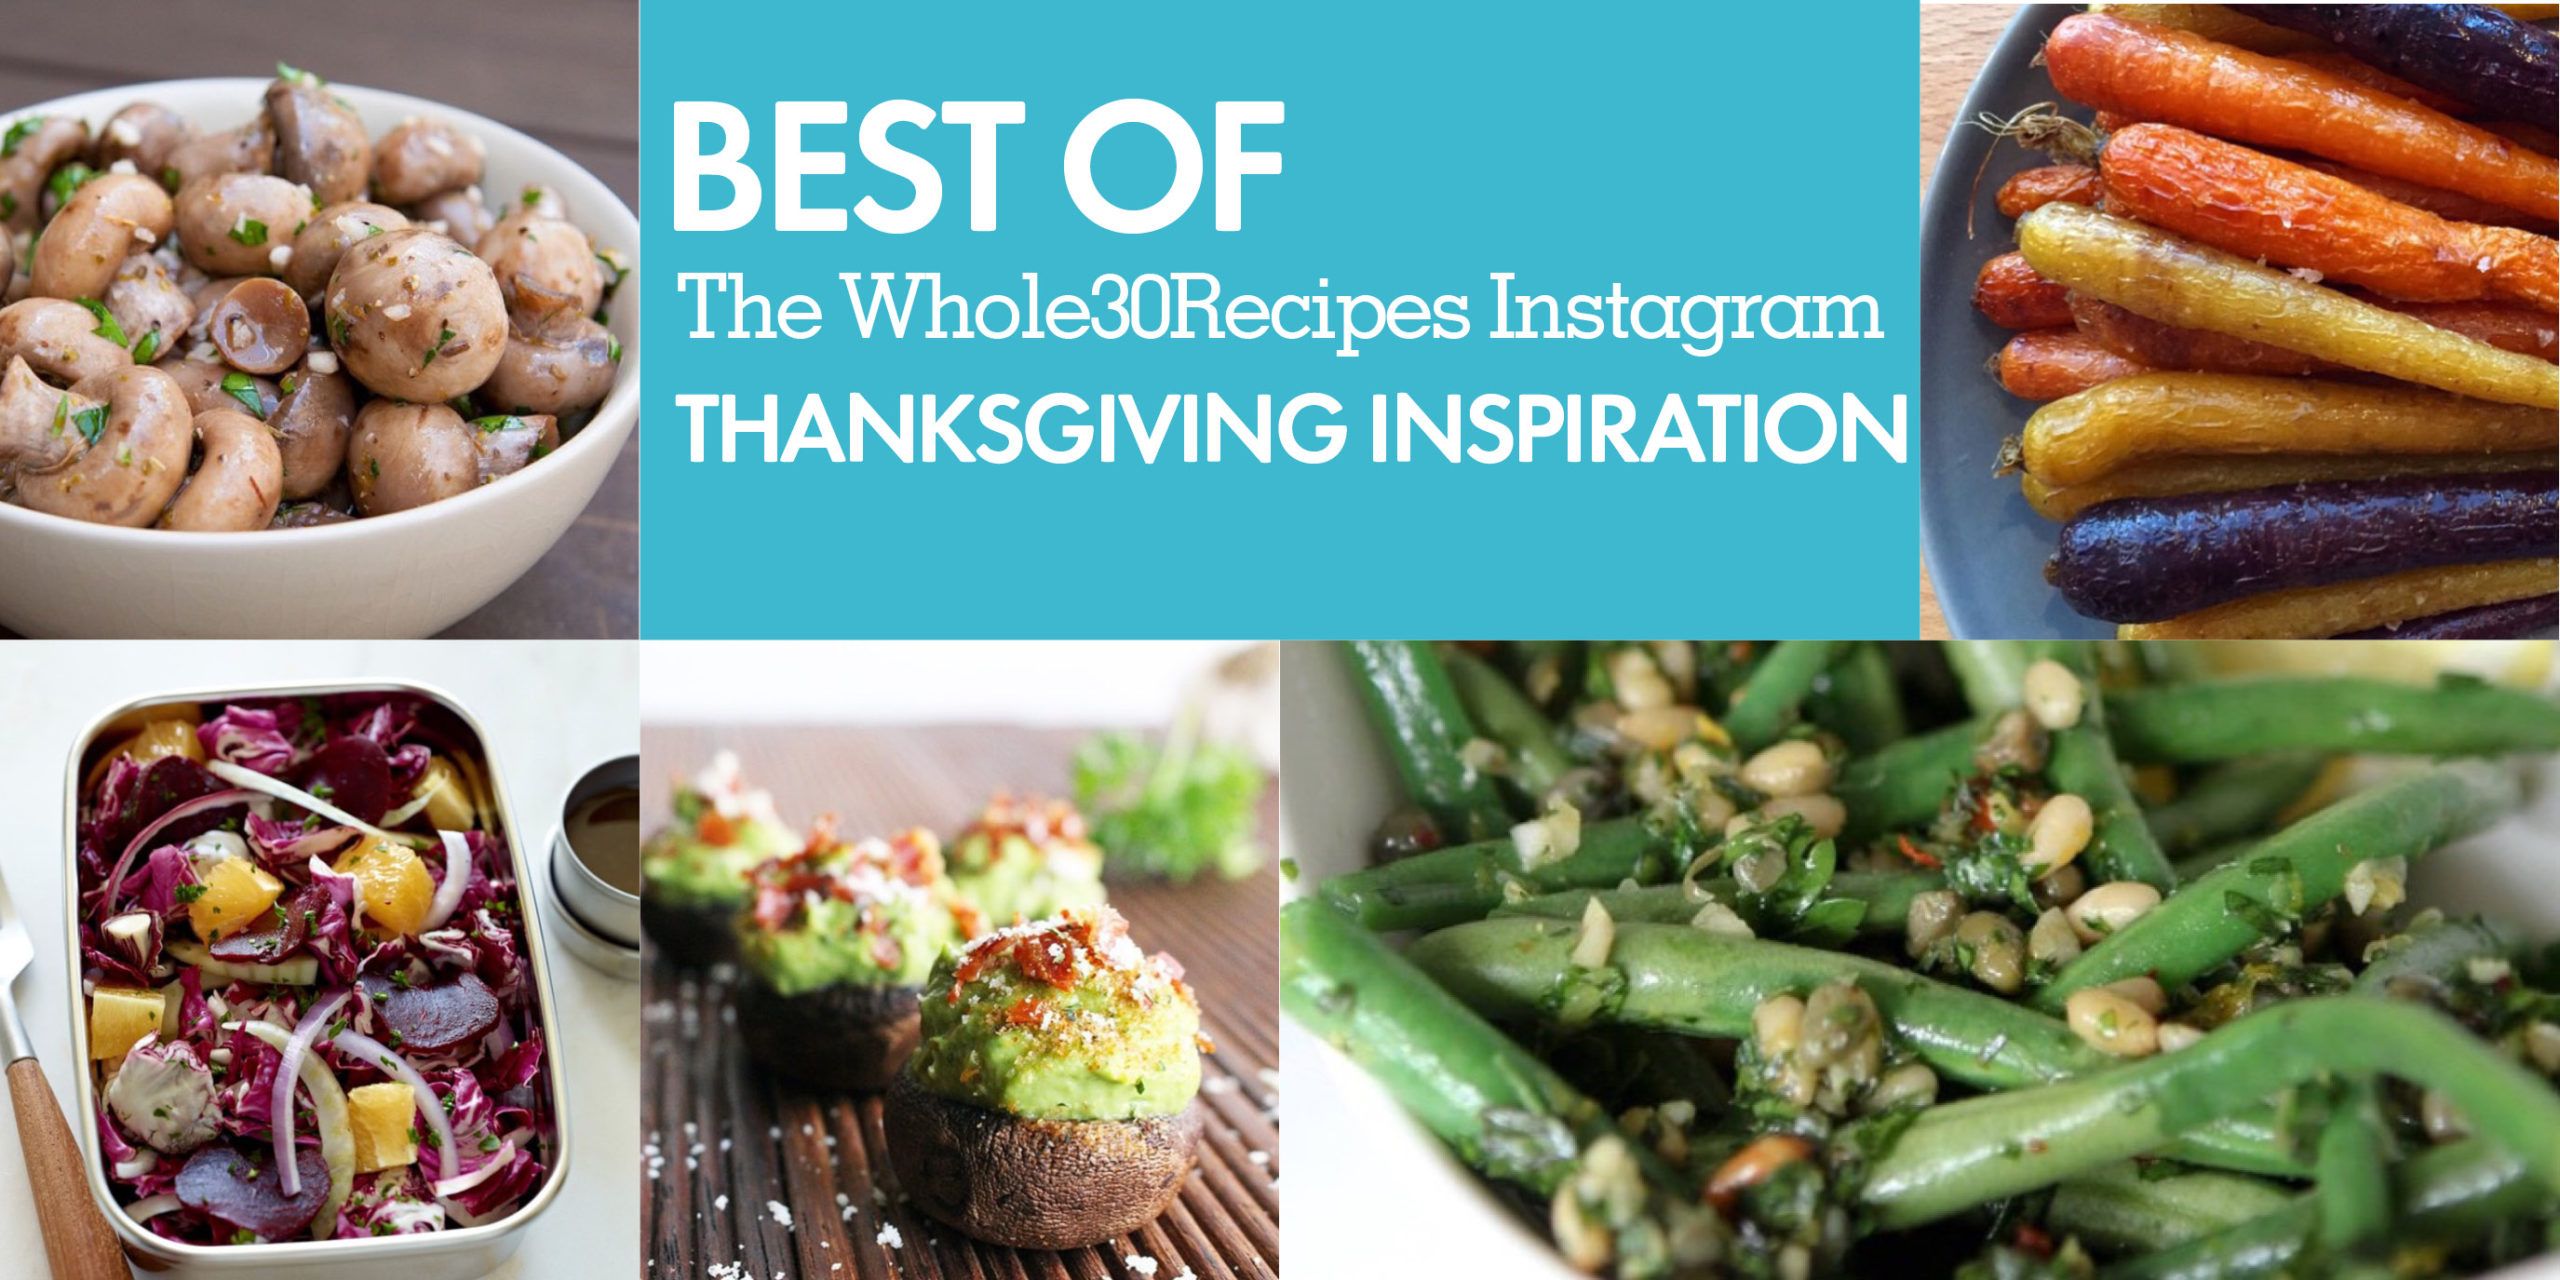 Best of Whole30 Recipes: Thanksgiving Inspiration